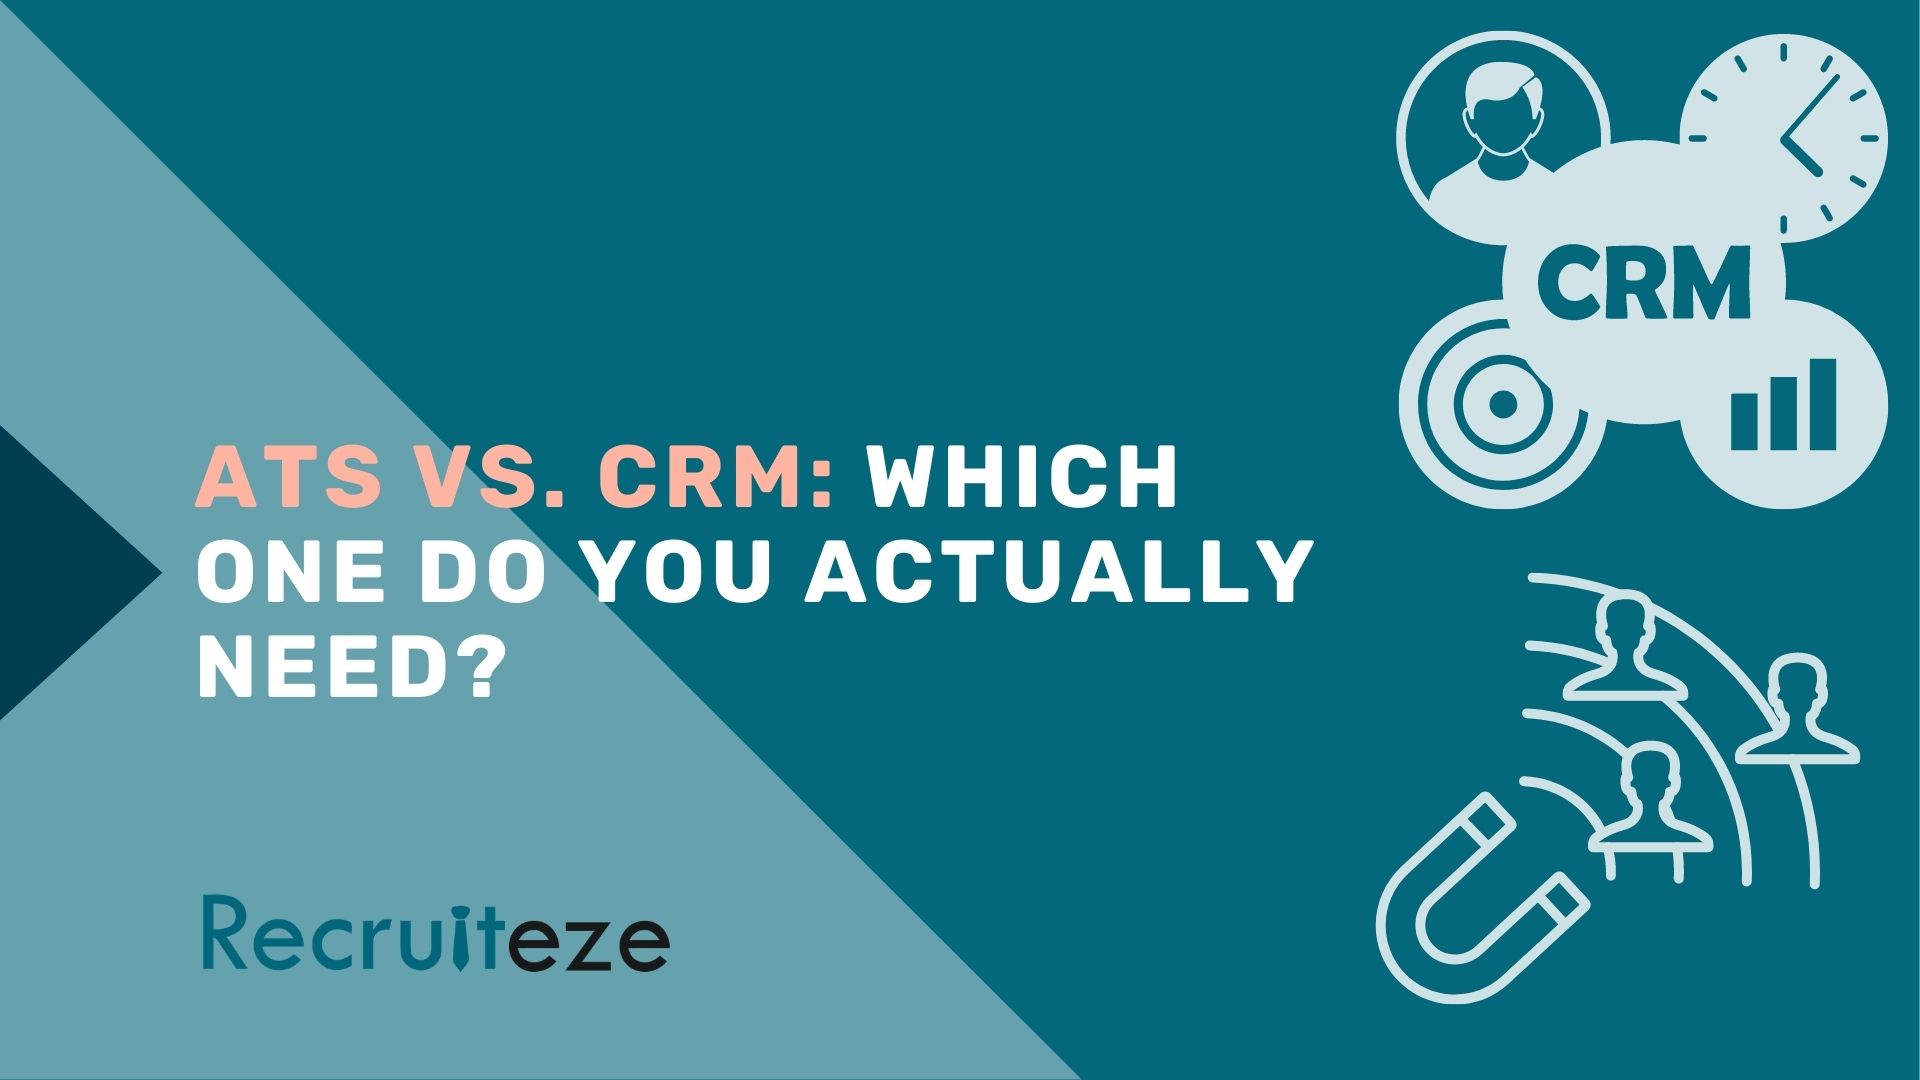 ATS vs CRM - which one do you actually need (featured image)